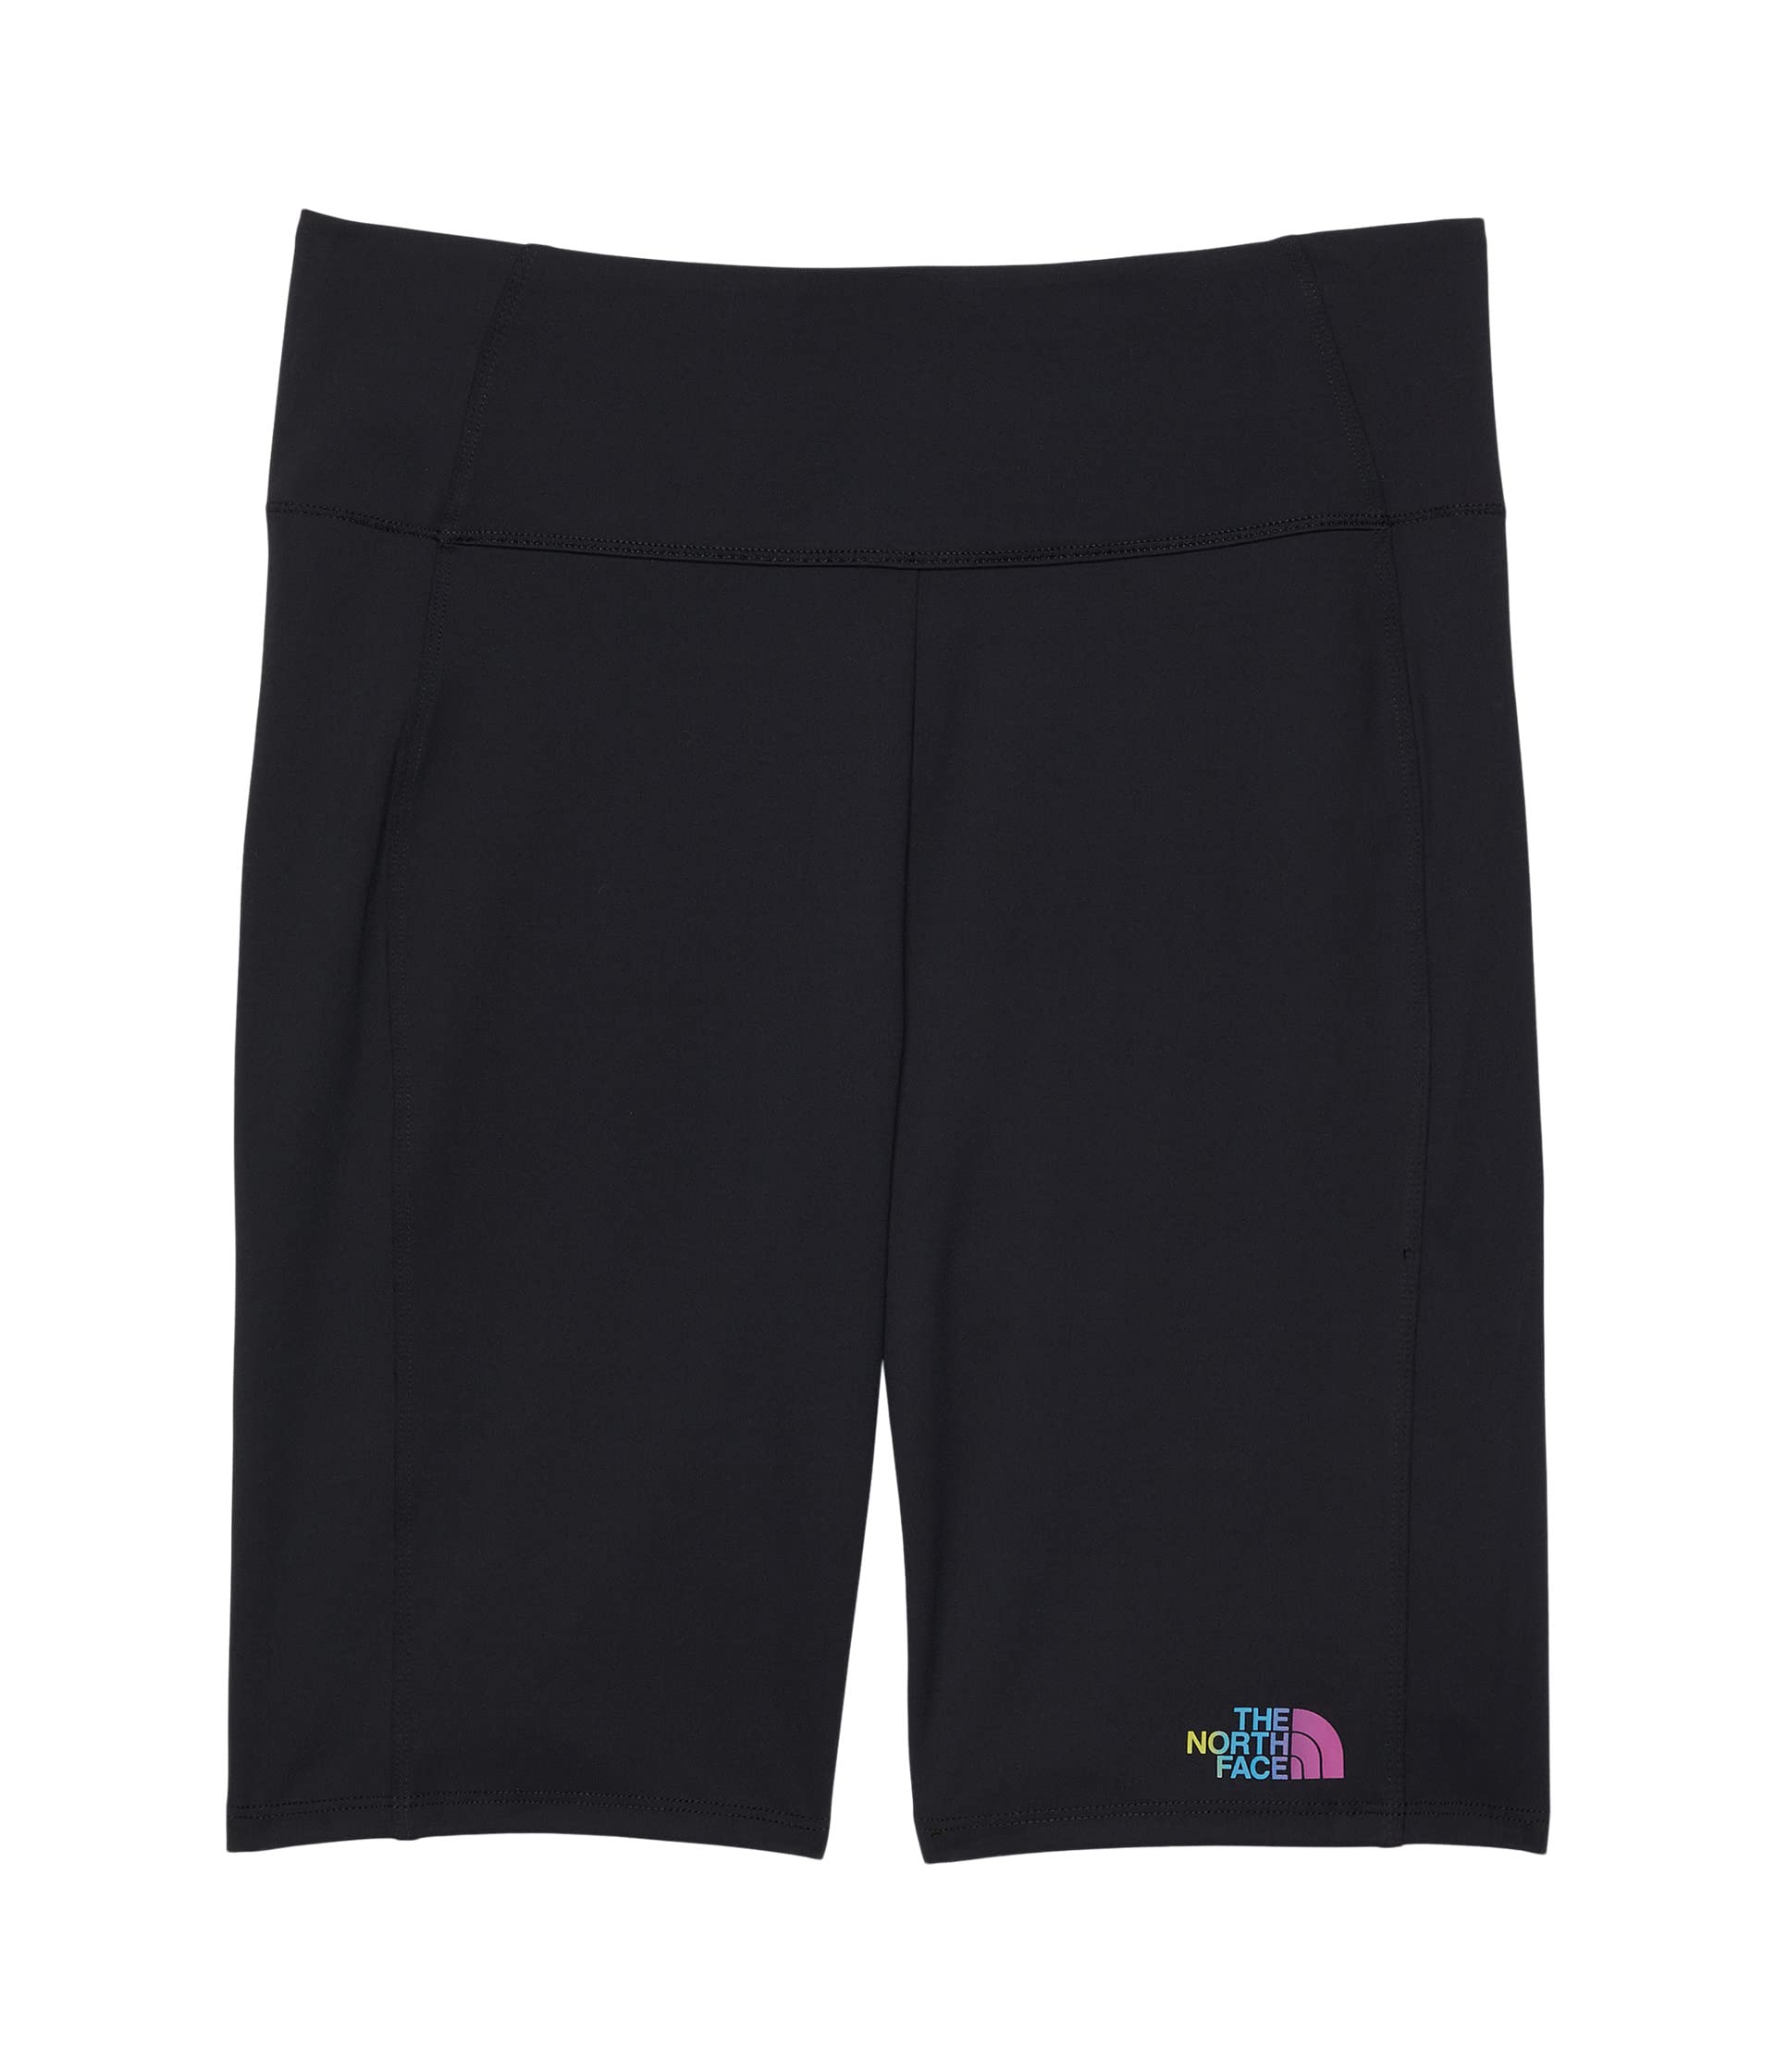 Шорты The North Face Kids, Never Stop Bike Shorts шорты the north face never stop wearing shorts